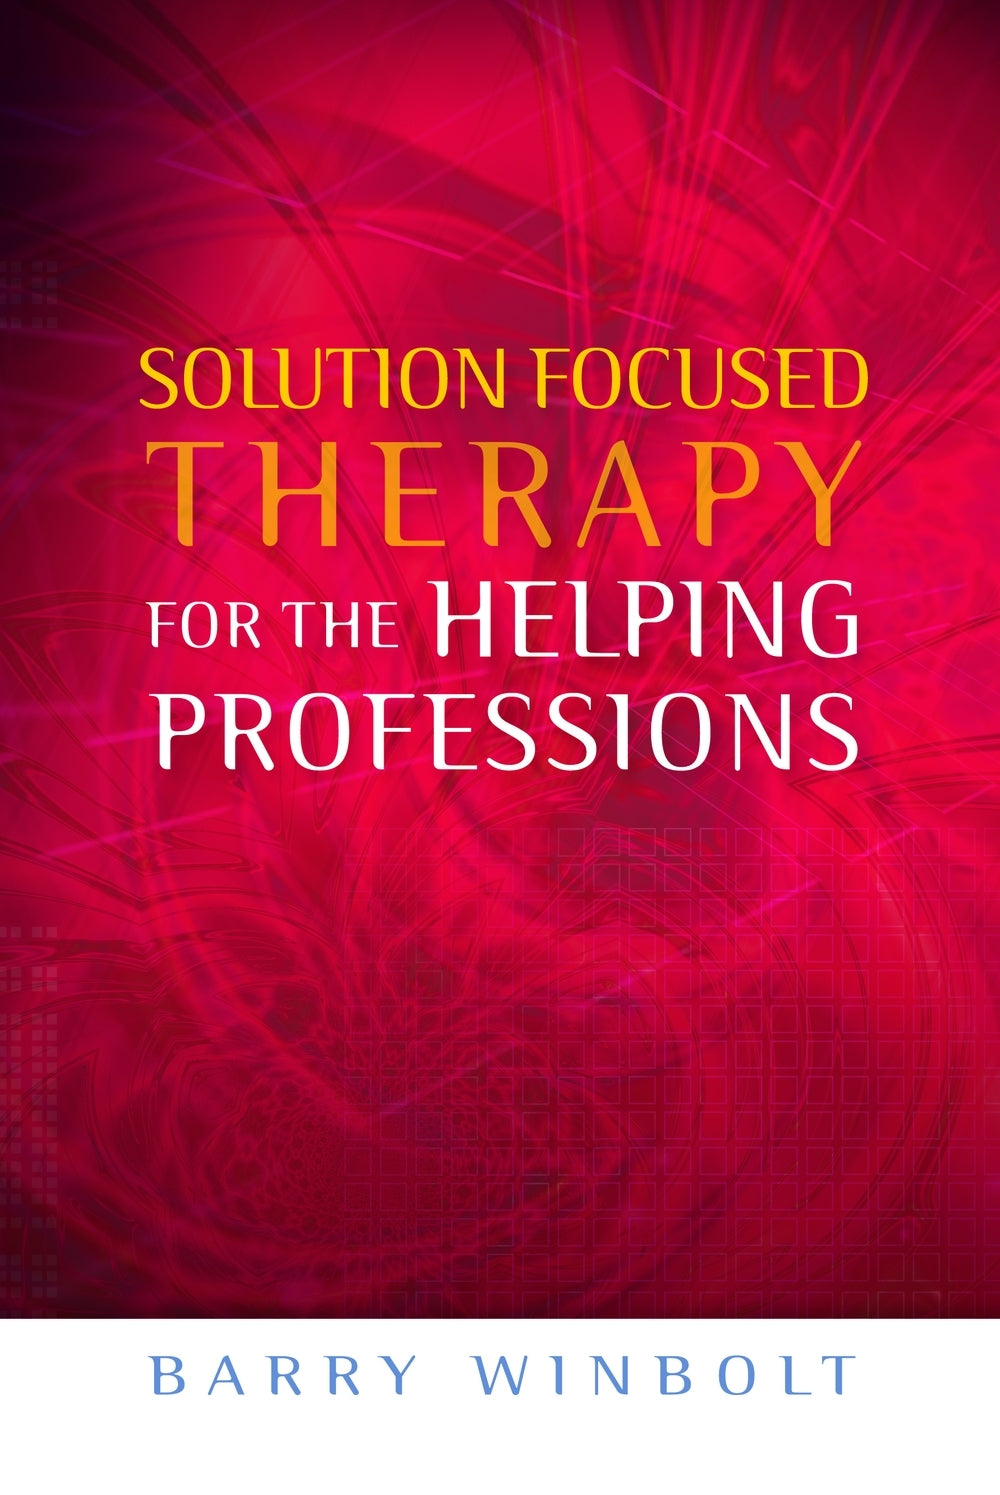 Solution Focused Therapy for the Helping Professions by Barry Winbolt